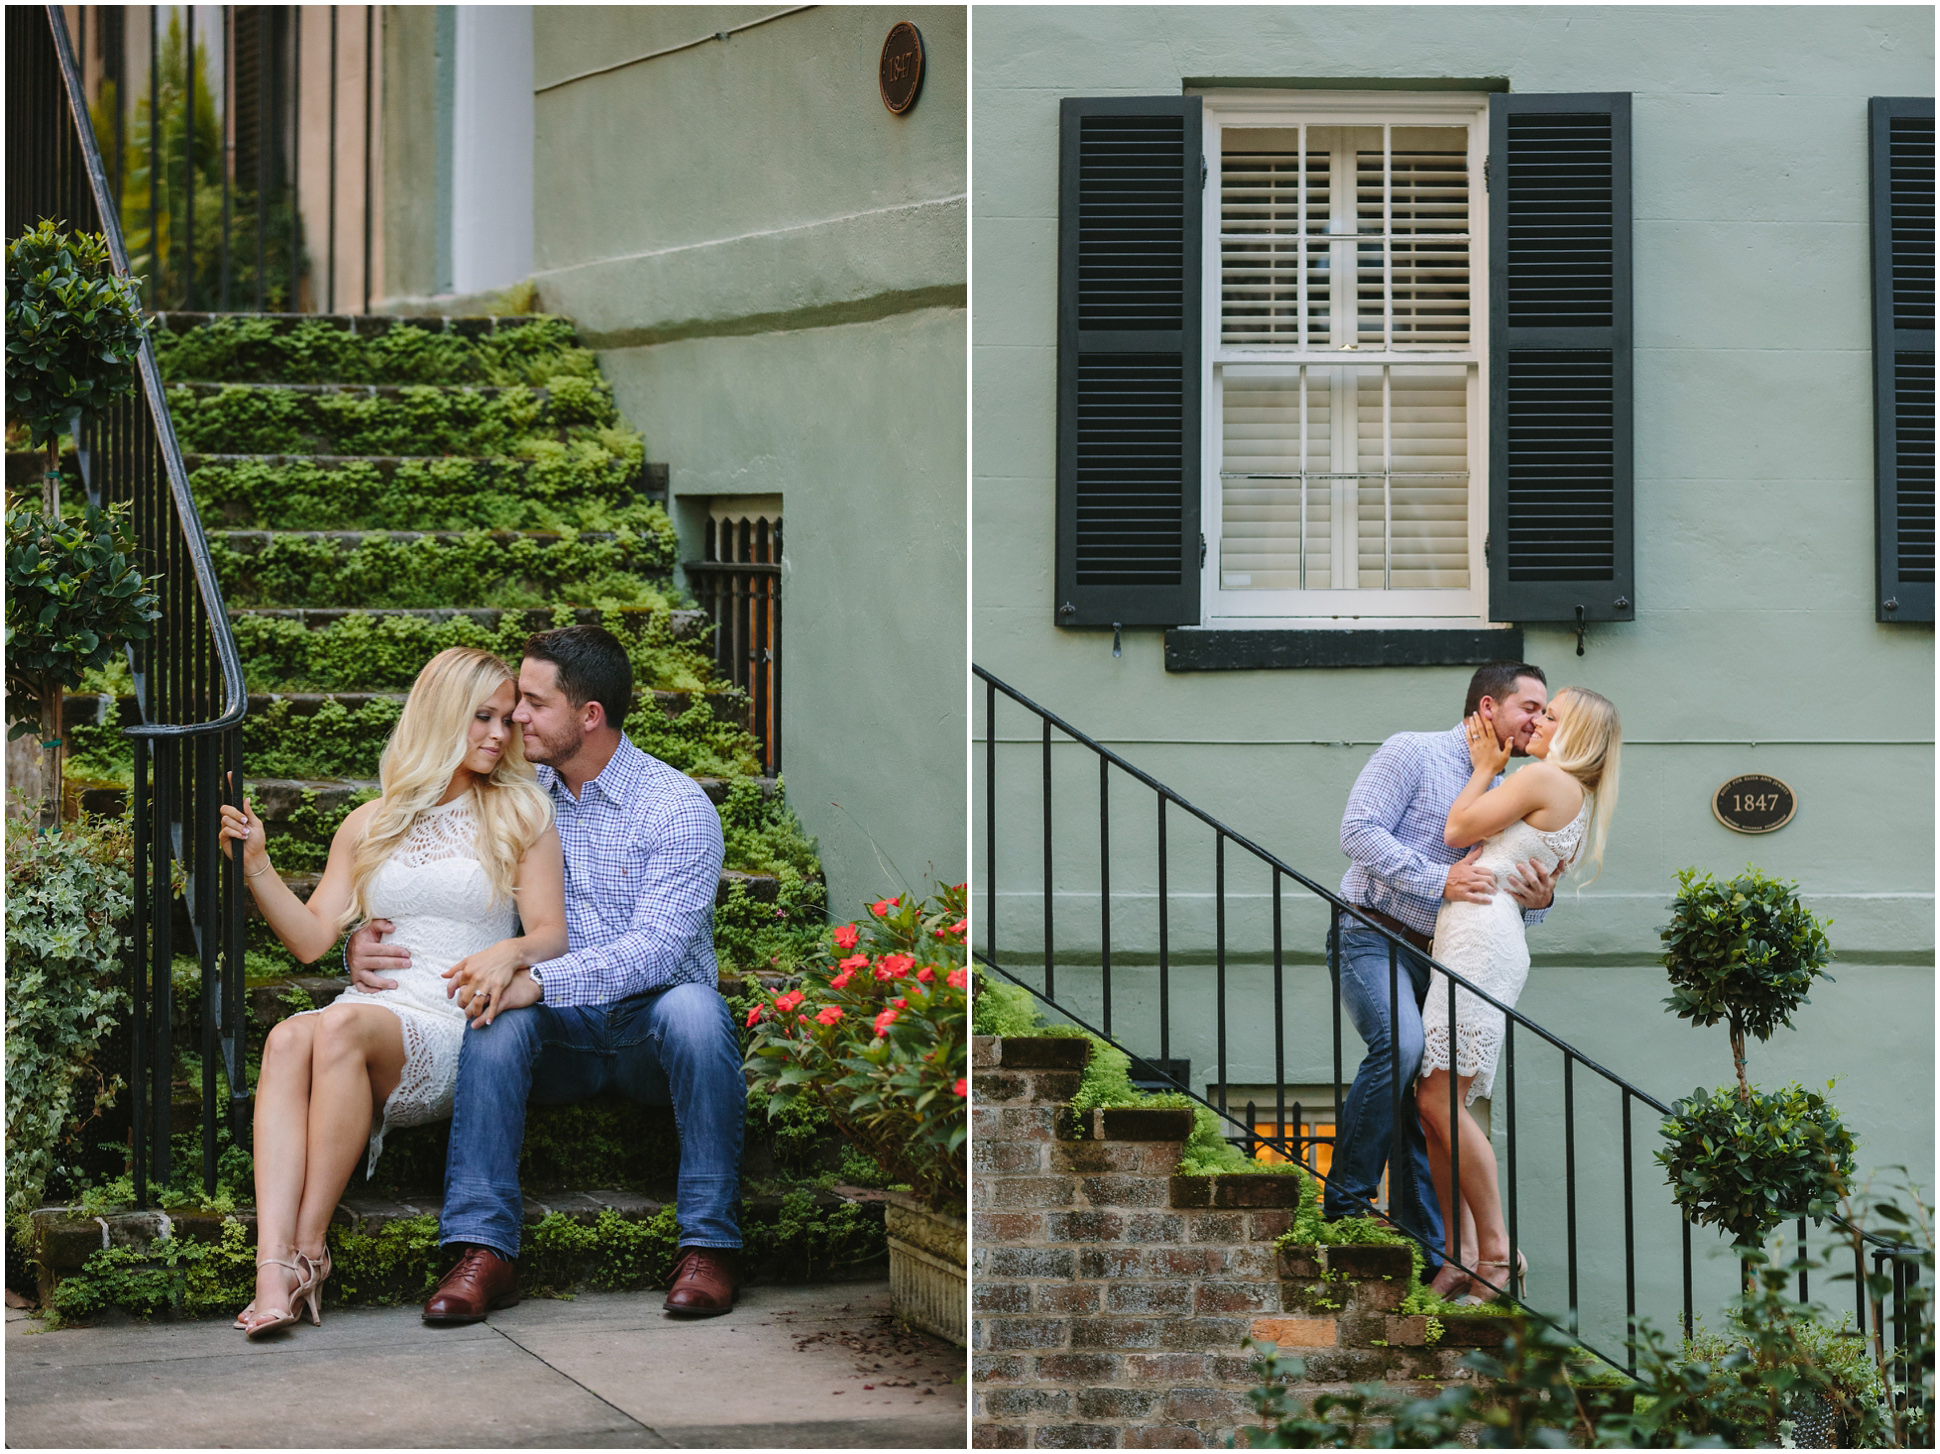 Wormsloe Historic Site and Downtown Savannah Engagement Session| Savannah, Georgia Wedding Photographers | Two Chics Photography | www.twochicsphotography.com